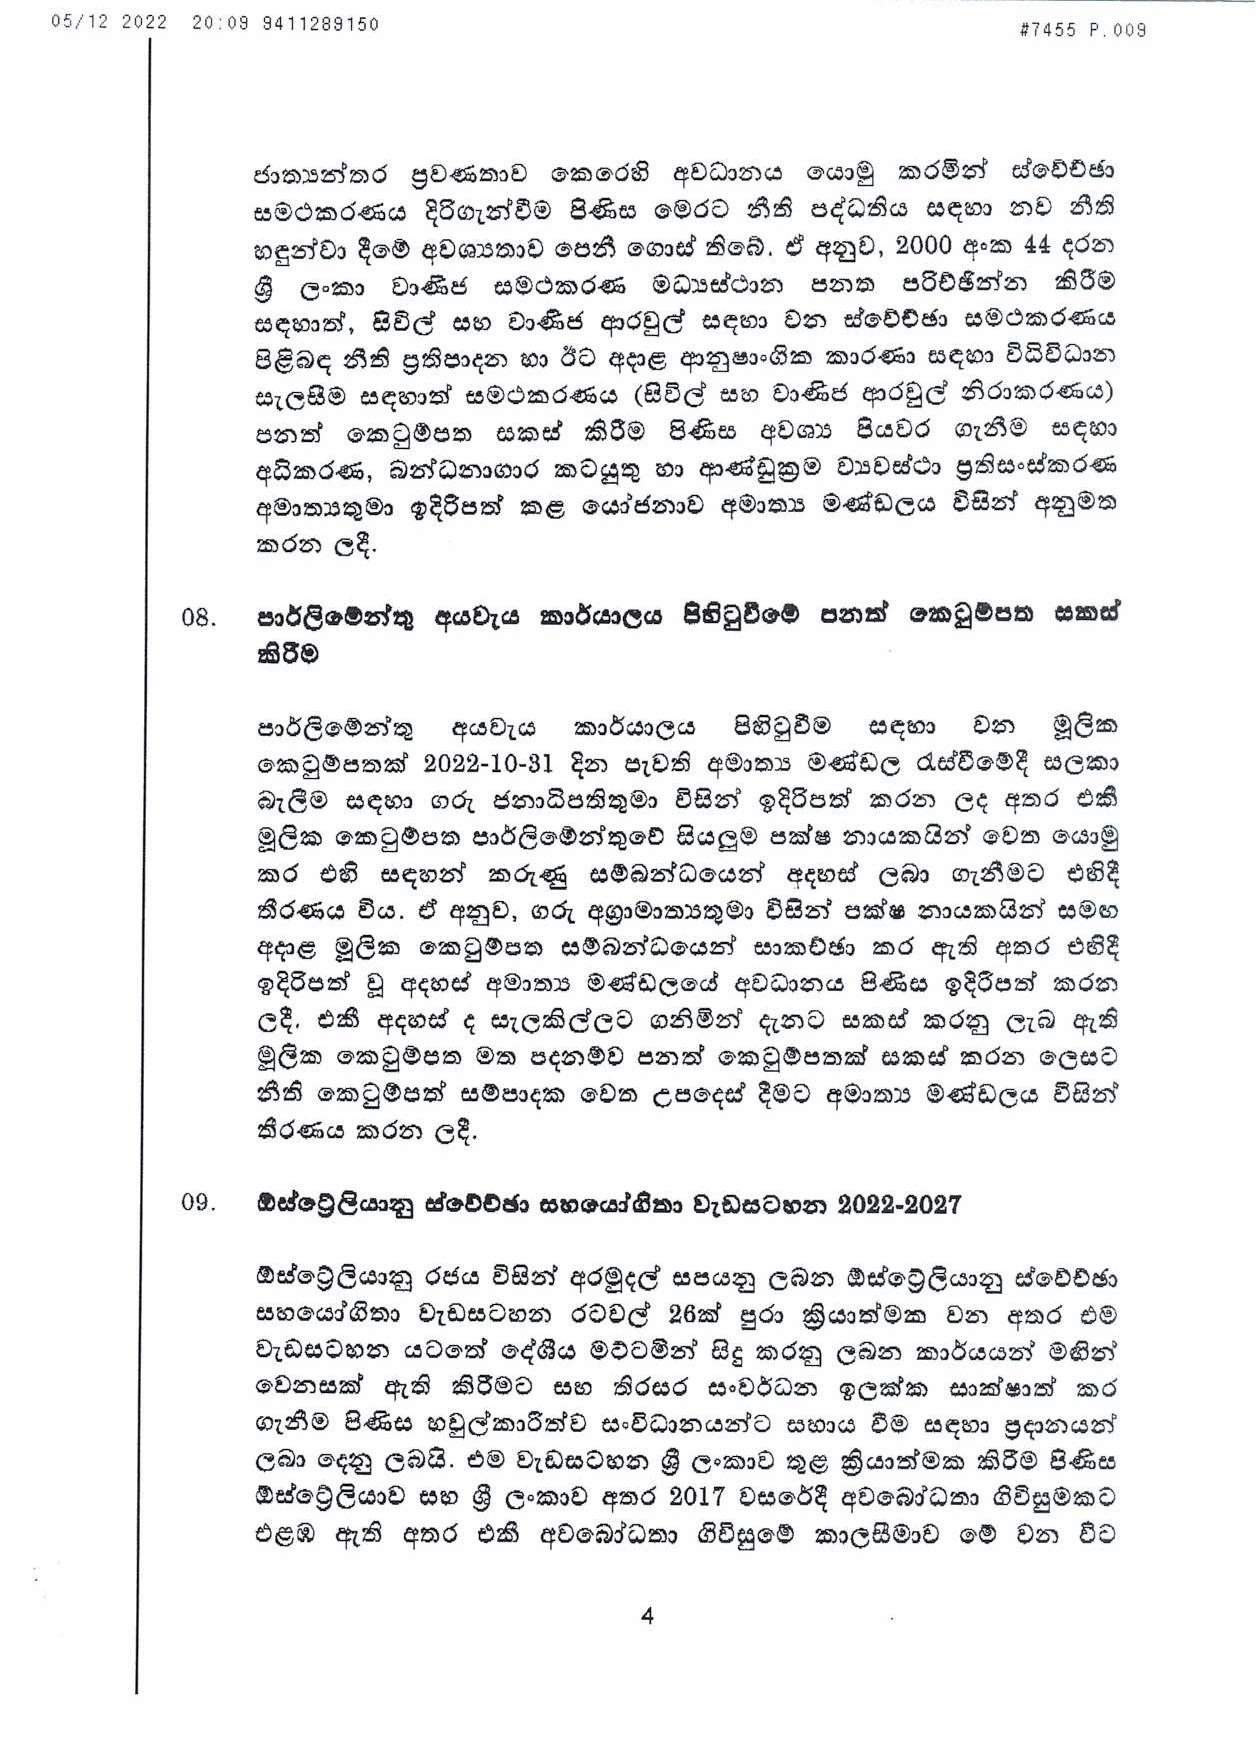 Cabinet Decisions on 05.12.2022 page 004